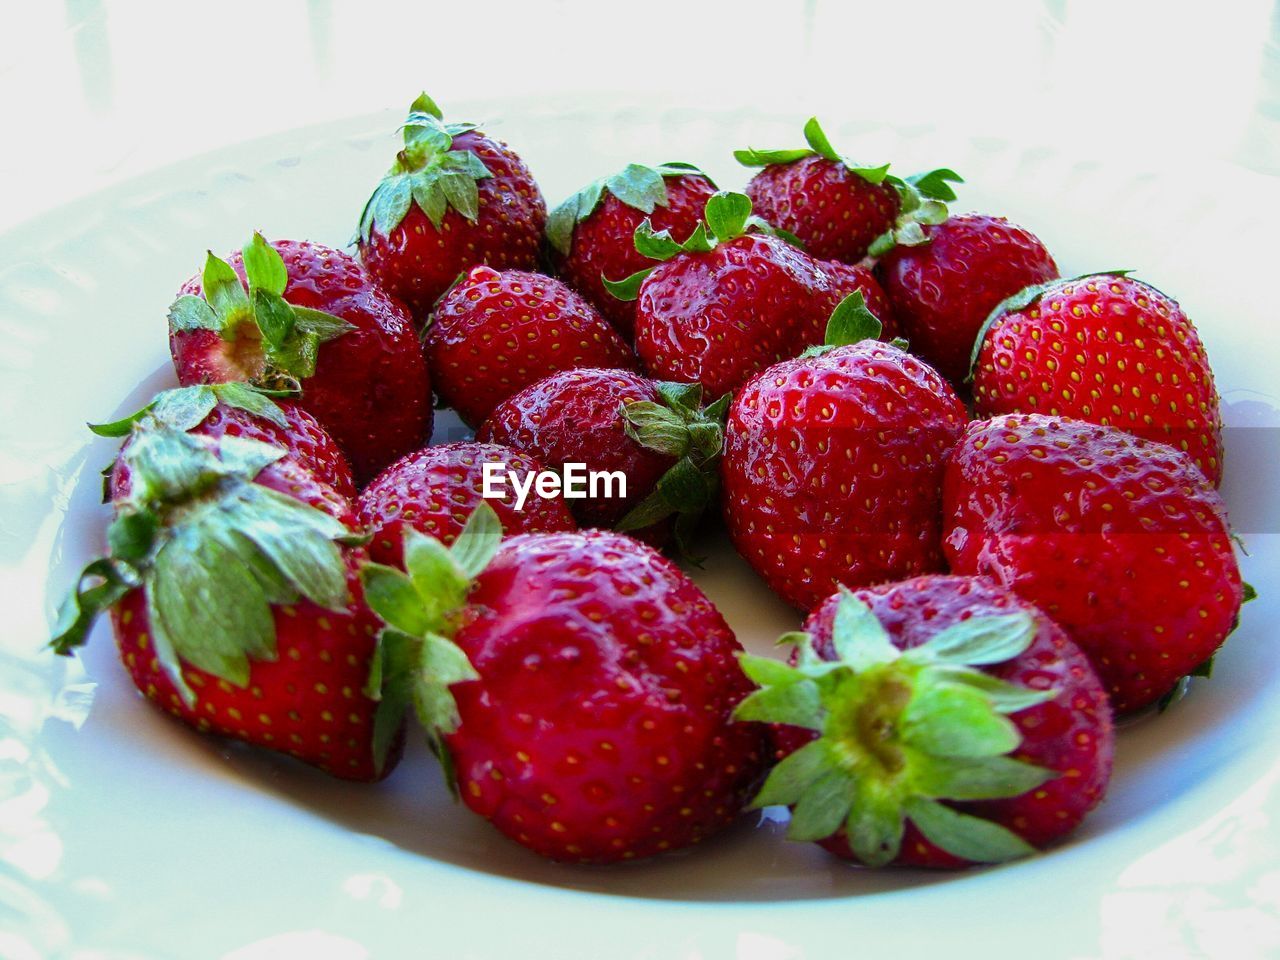 CLOSE-UP OF STRAWBERRIES ON PLATE